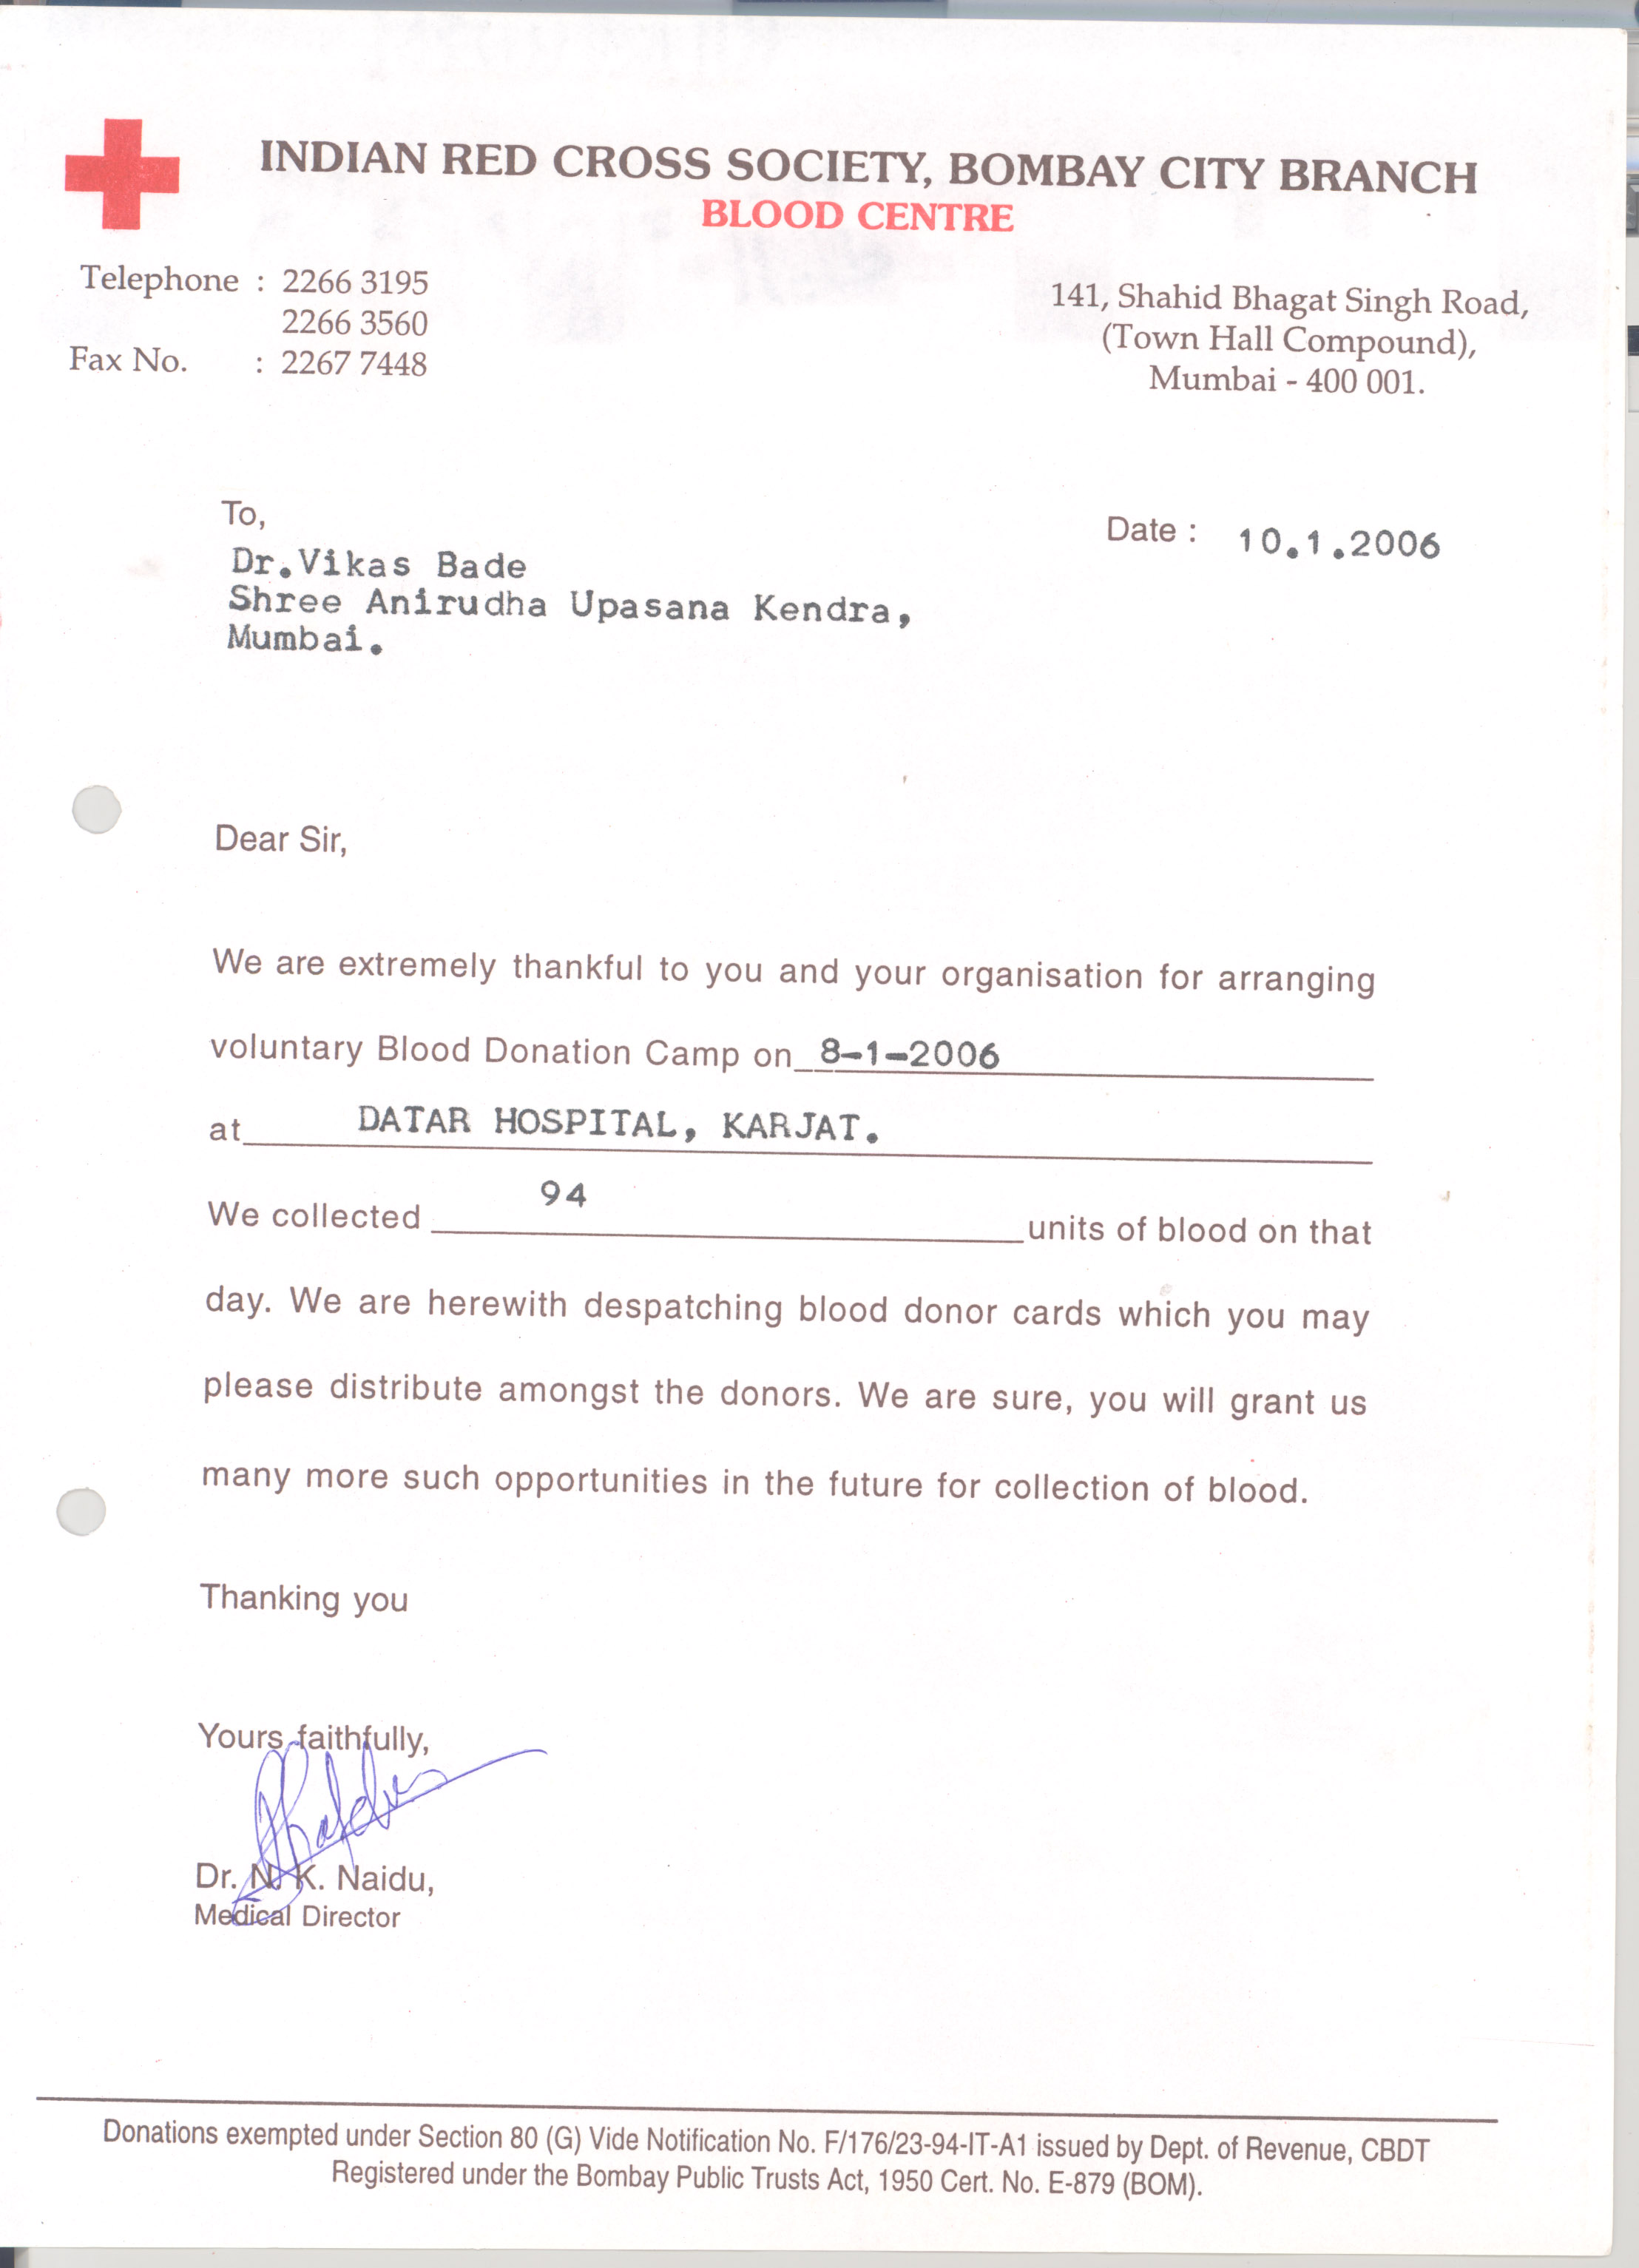 Appreciation-Letter from Indian Red Cross Soc 2006-for-Aniruddhafoundation-Compassion-Social-services